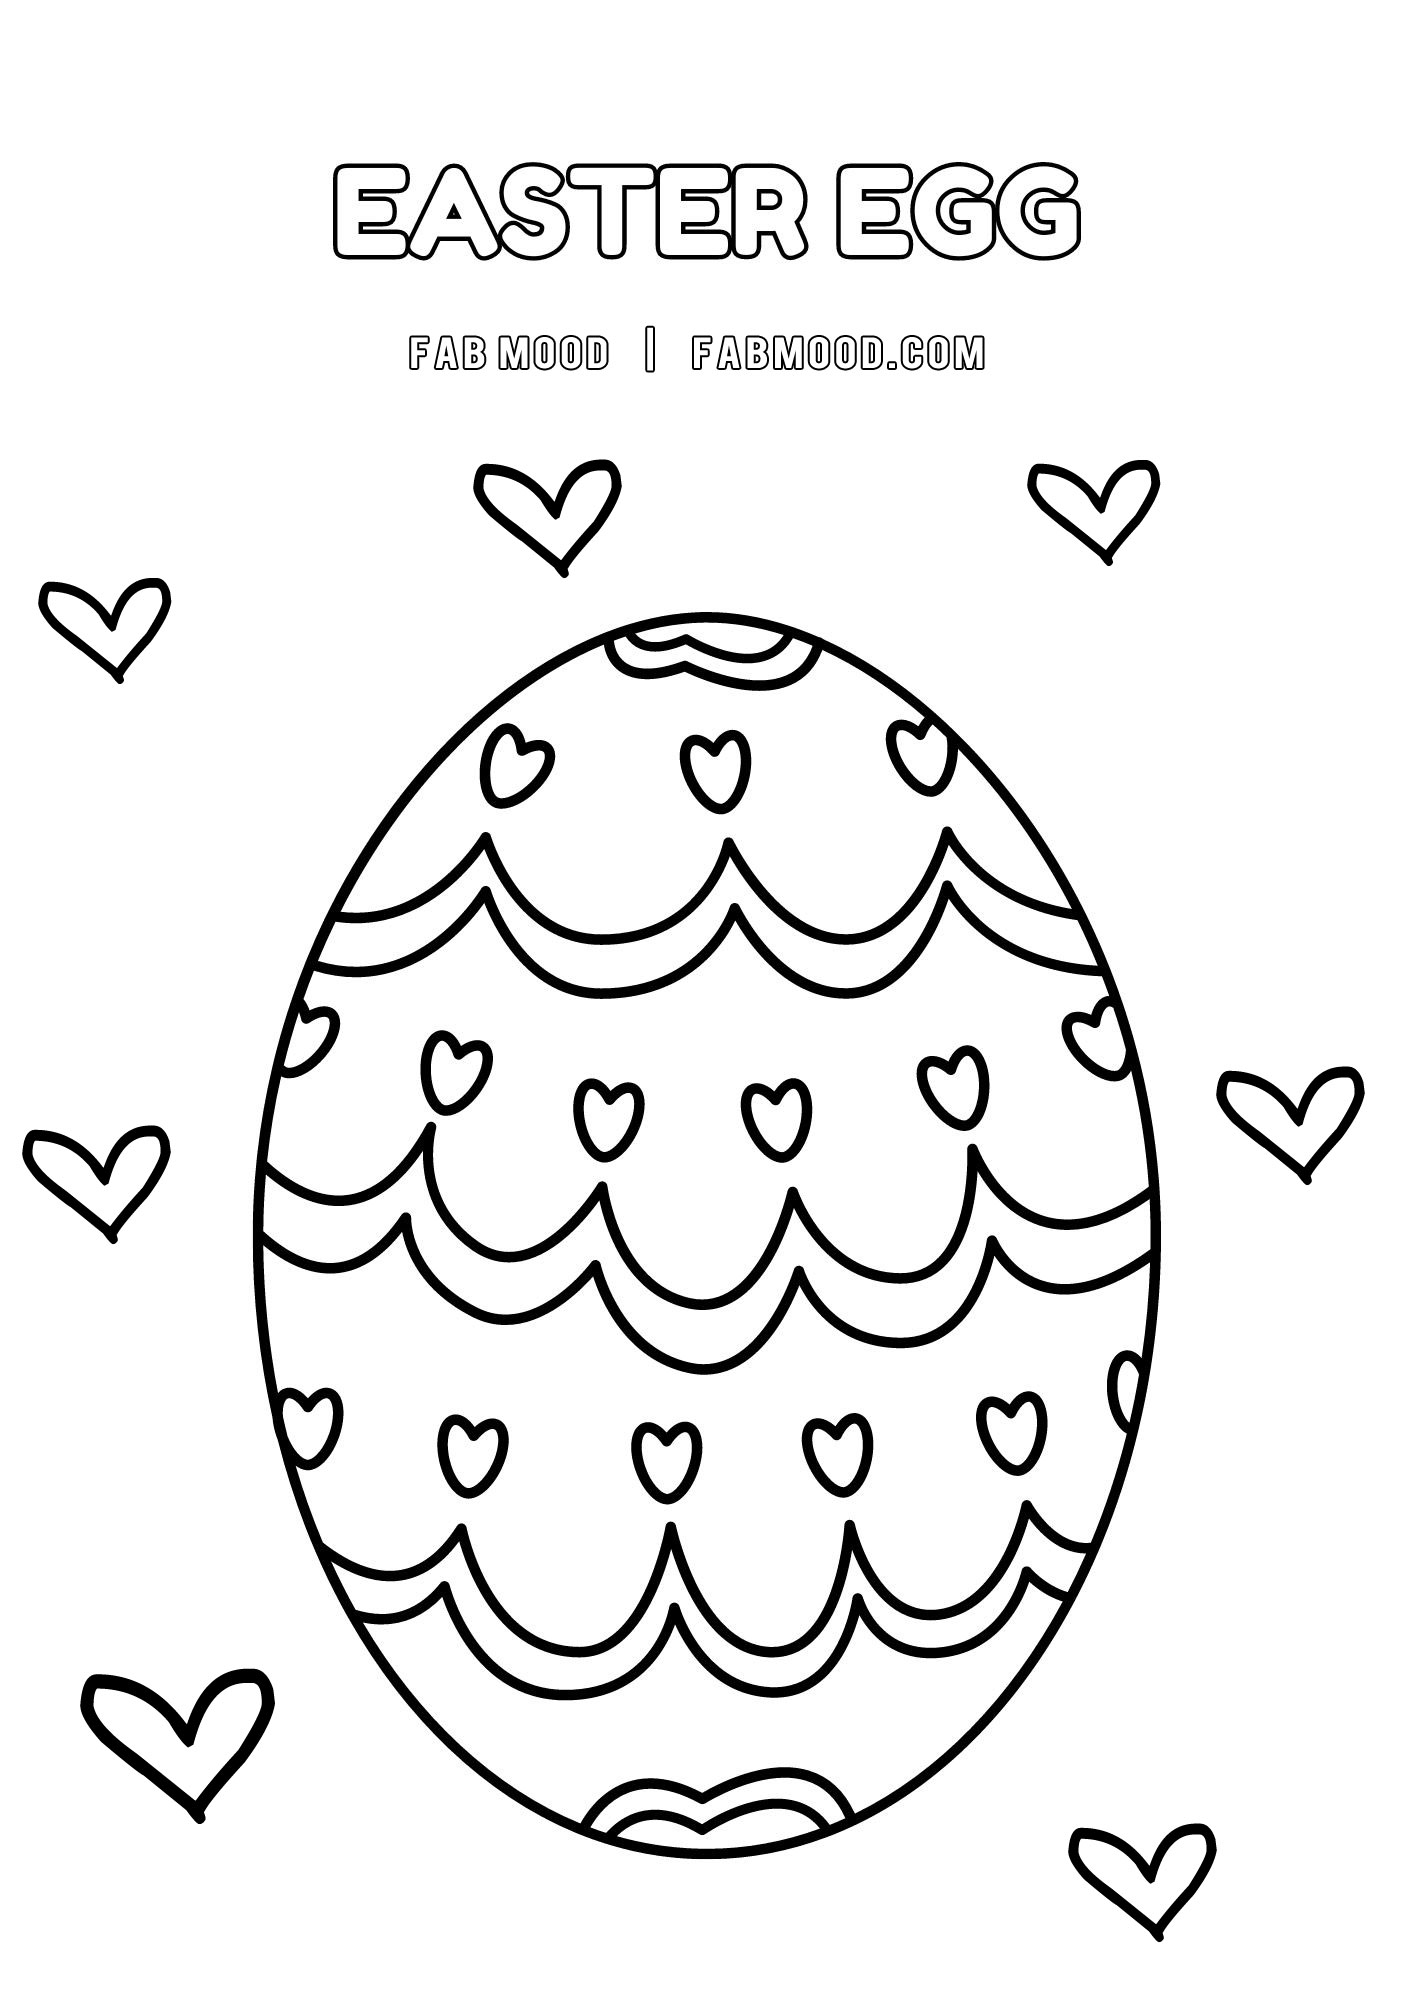 FREE 10 Easter Colouring Pictures : Easter Egg & Love Hearts